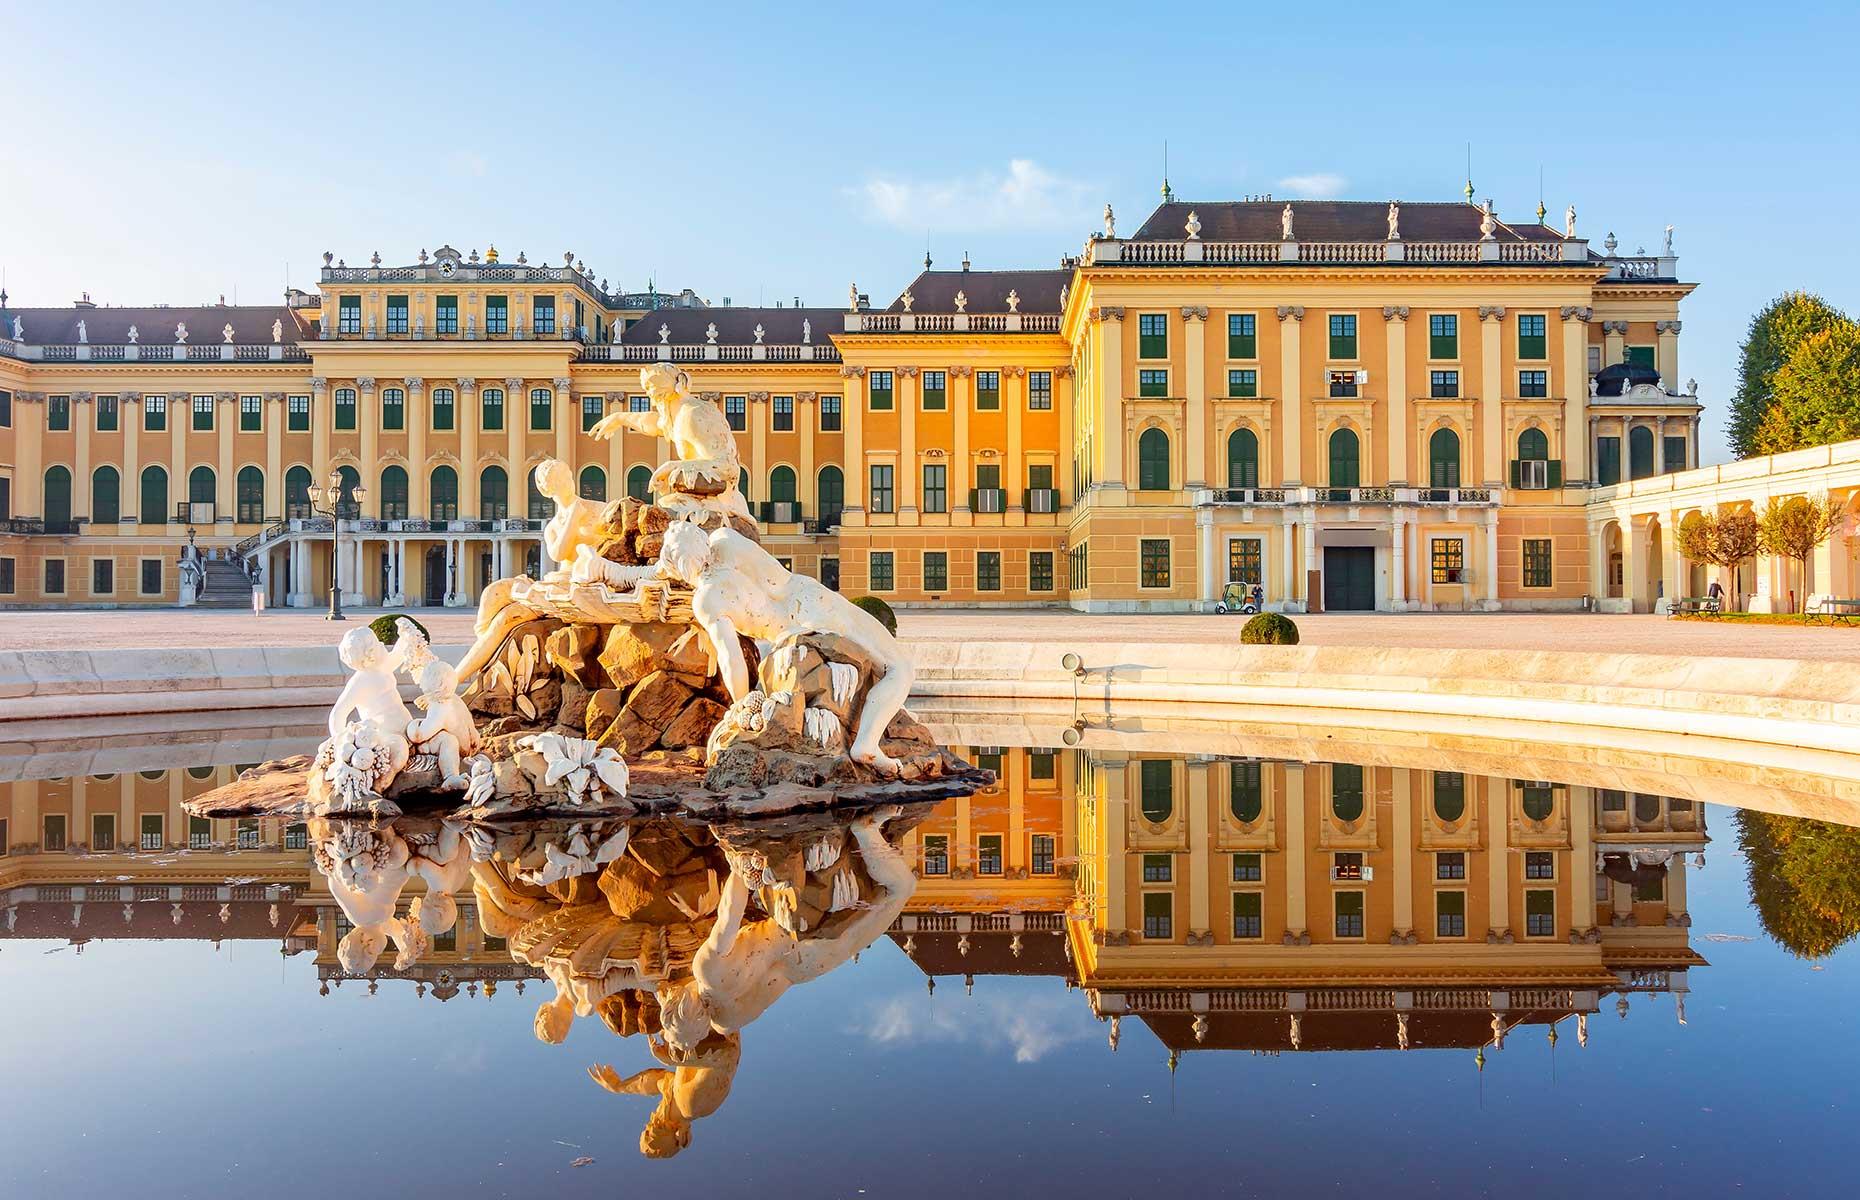 <p>Many of the city's museums, galleries and attractions are wheelchair-friendly too. Don’t miss the Gustav Klimt masterpieces at the Belvedere Palace and Museum (pictured), or the jaw-dropping palaces of Schloss Schönbrunn and Hofburg. Complete your stay at the elegant and accessible <a href="https://www.booking.com/hotel/at/apartments-rooseveltplatz.en-gb.html">Apartments Rooseveltplatz</a>, with its upper floors accessible by elevator.</p>